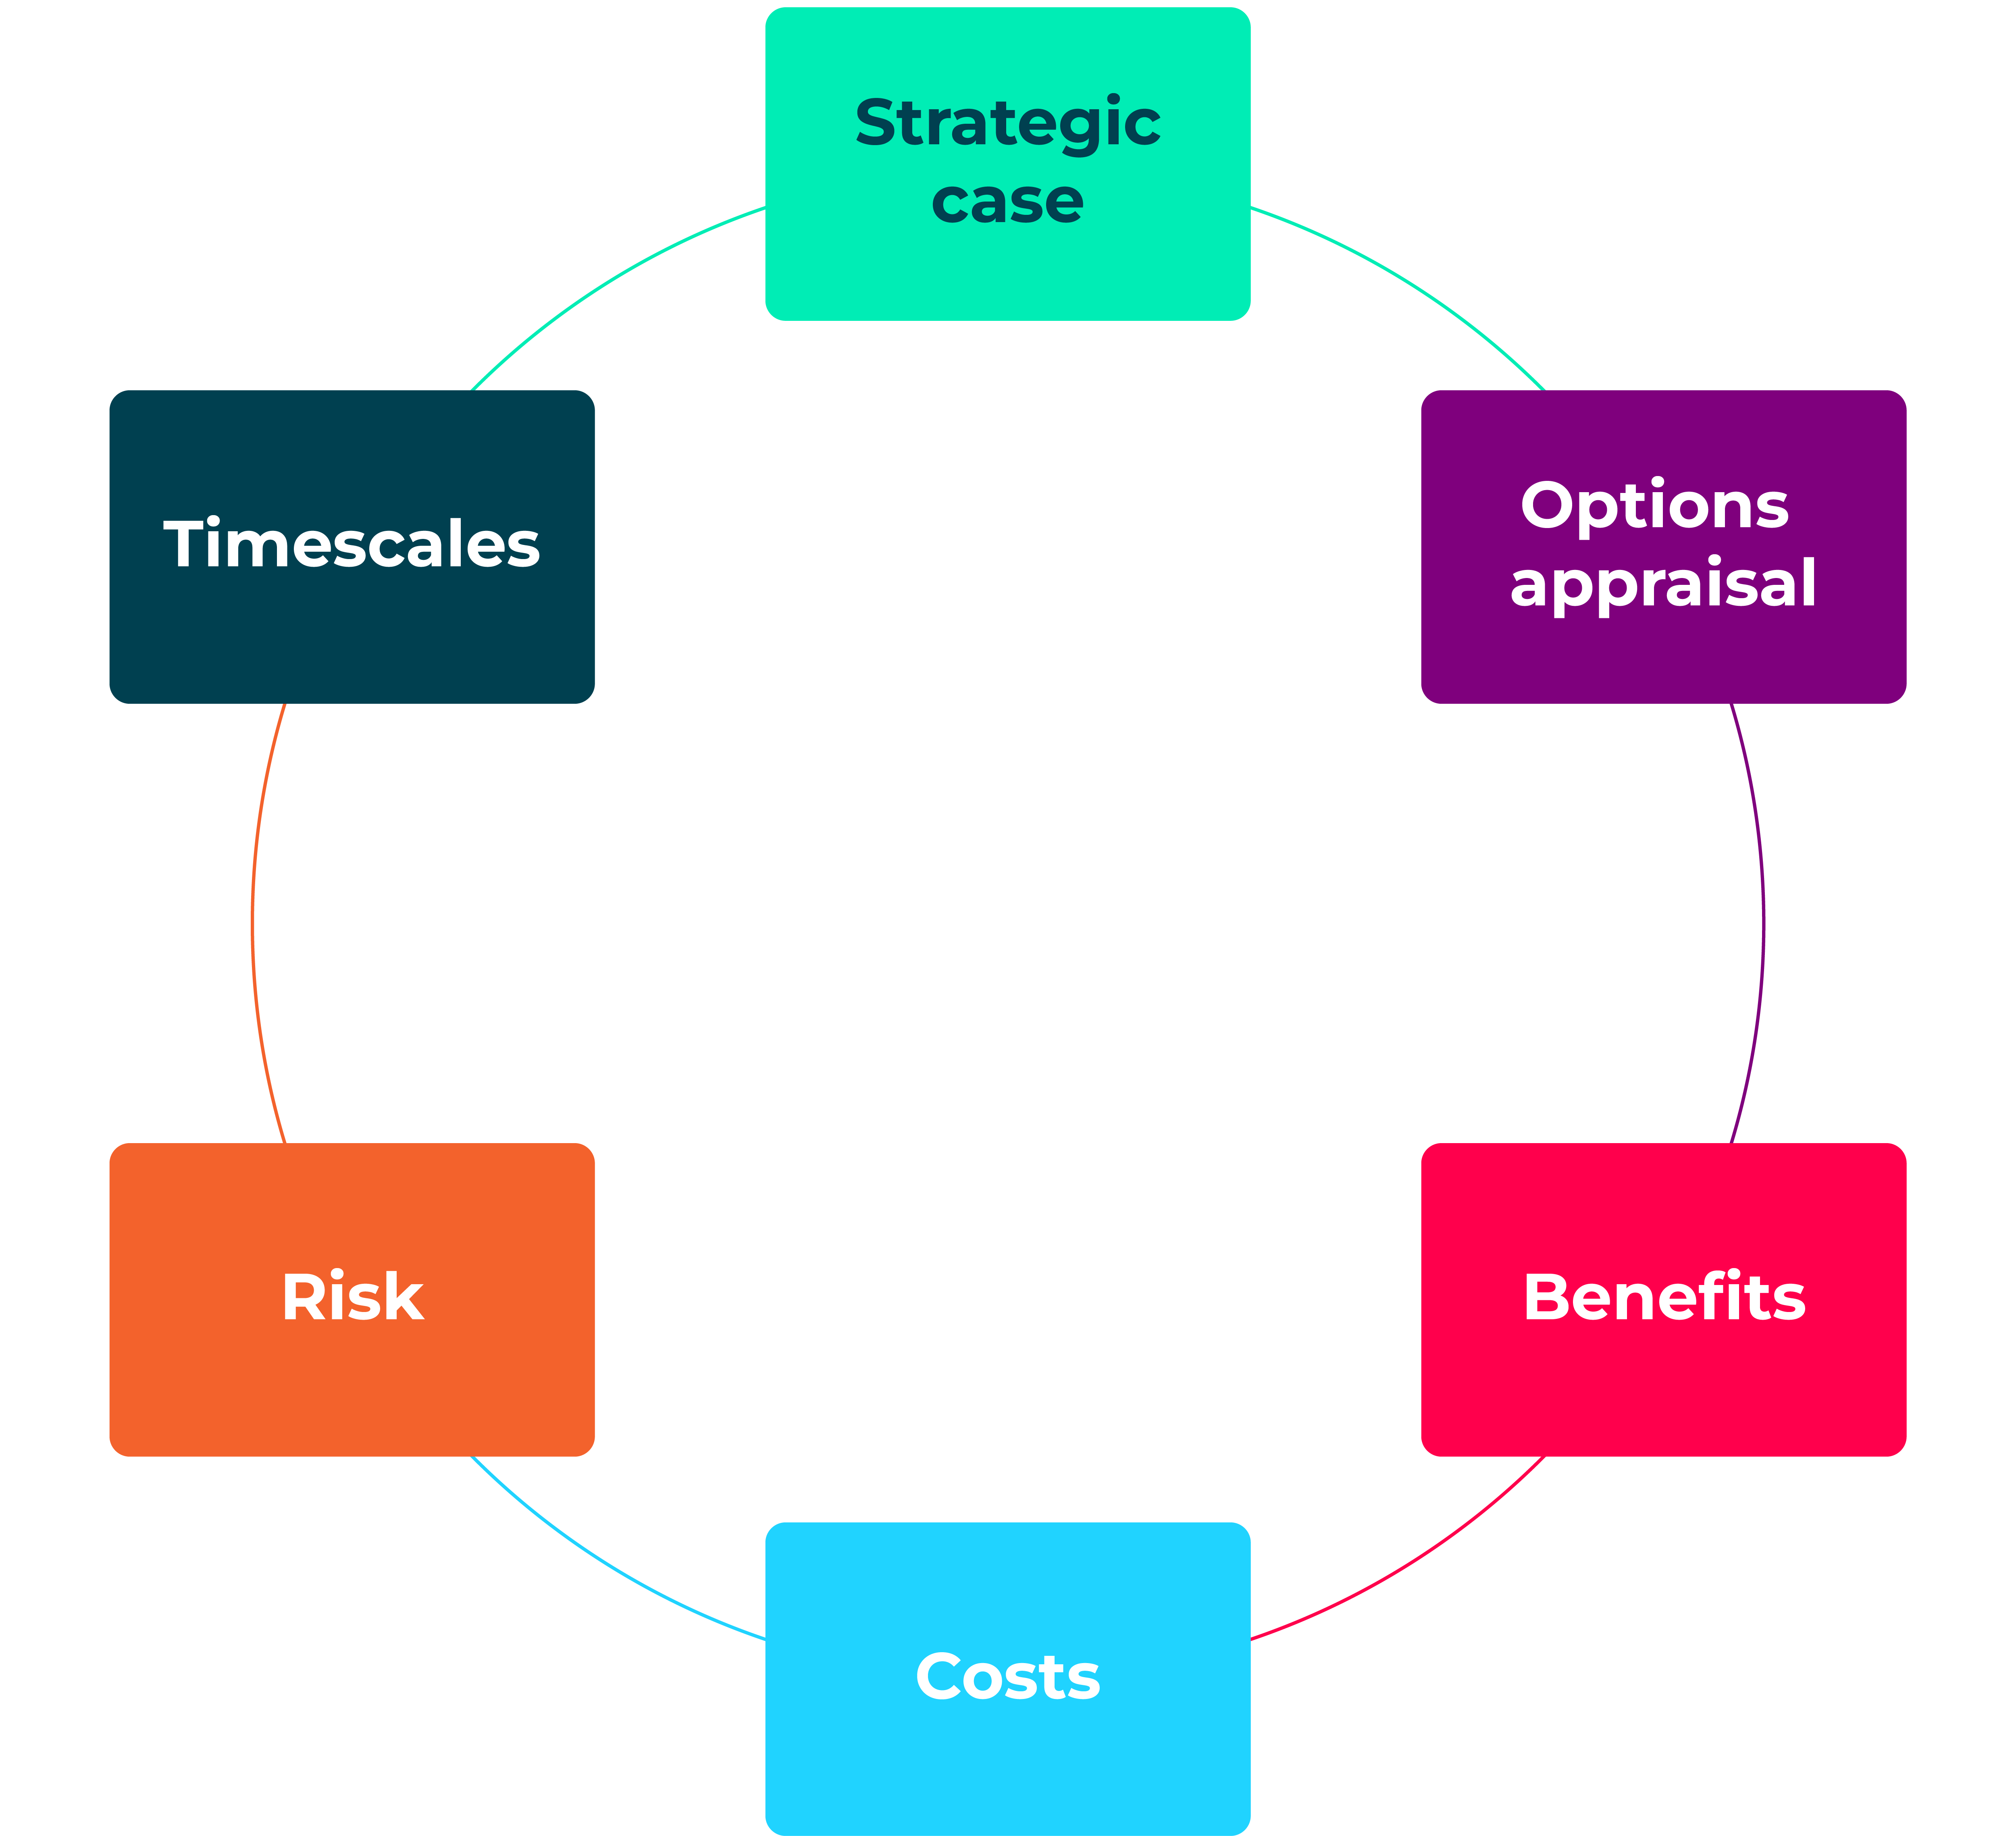 A circular diagram showing business case content, displayed as linked boxes: strategic case, options appraisal, benefits, costs, risk, and timescales.